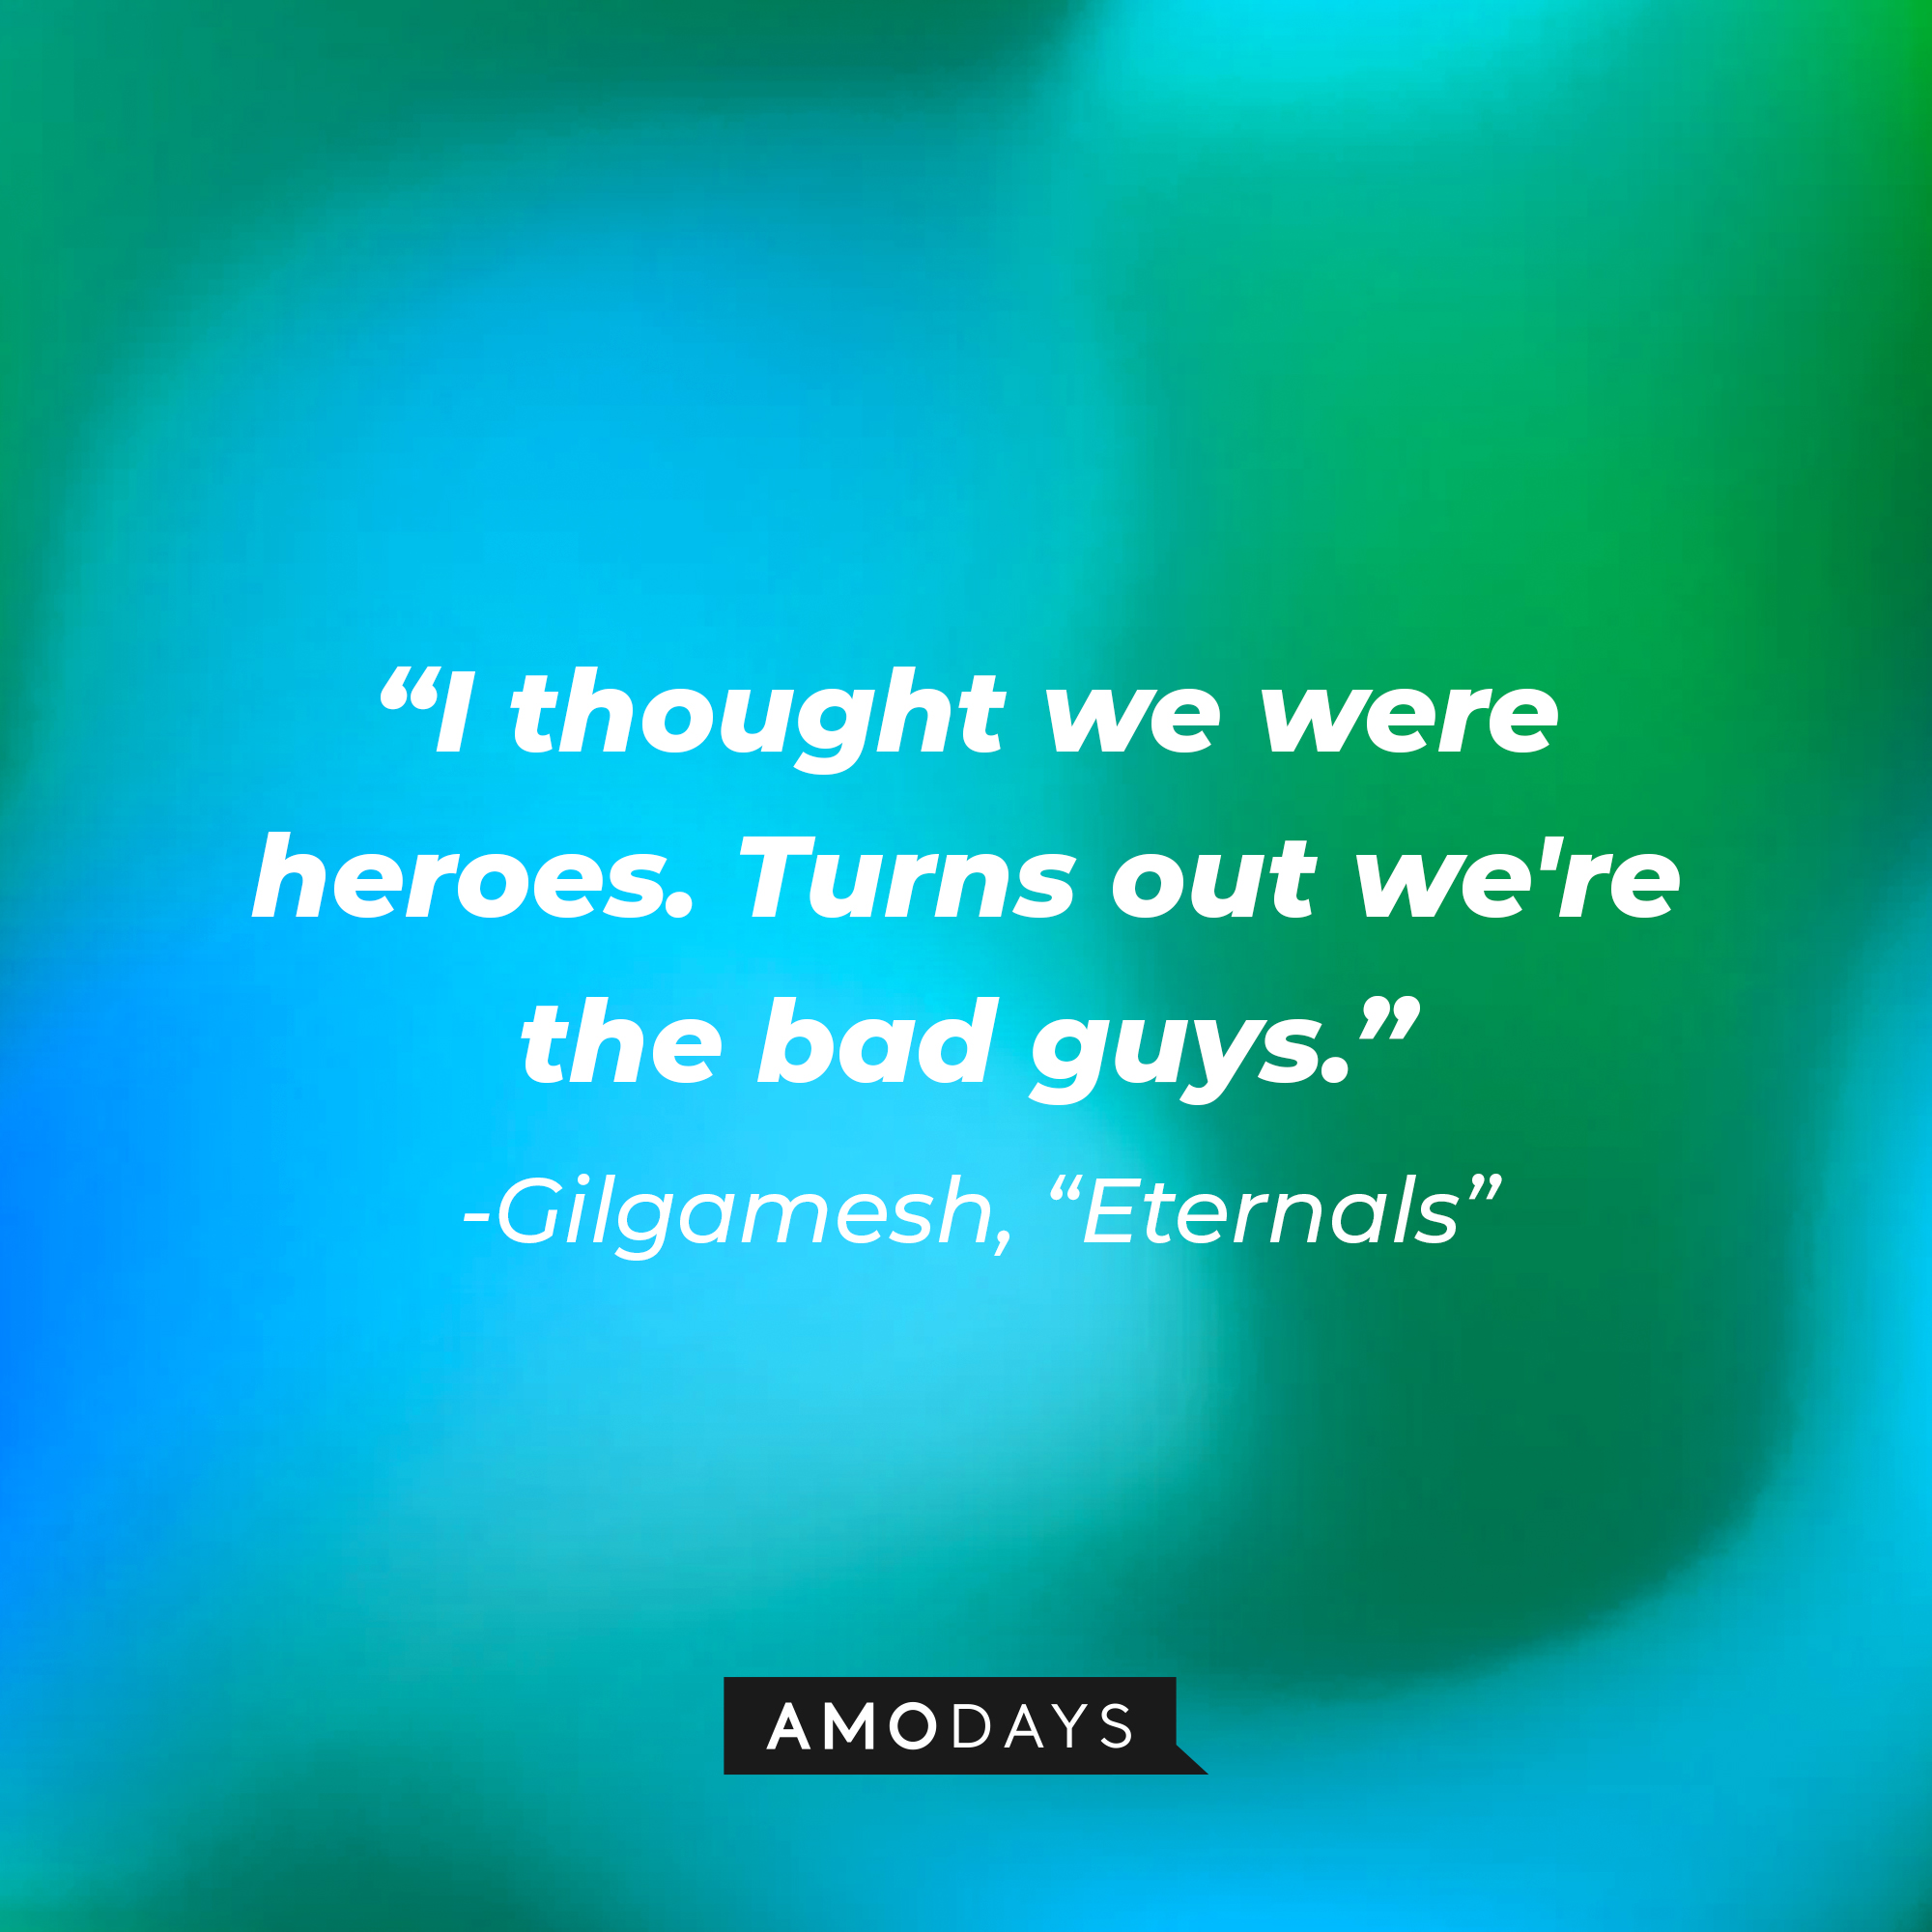 Gilgamesh’s quote: "I thought we were heroes. Turns out we're the bad guys." | Image: AmoDays